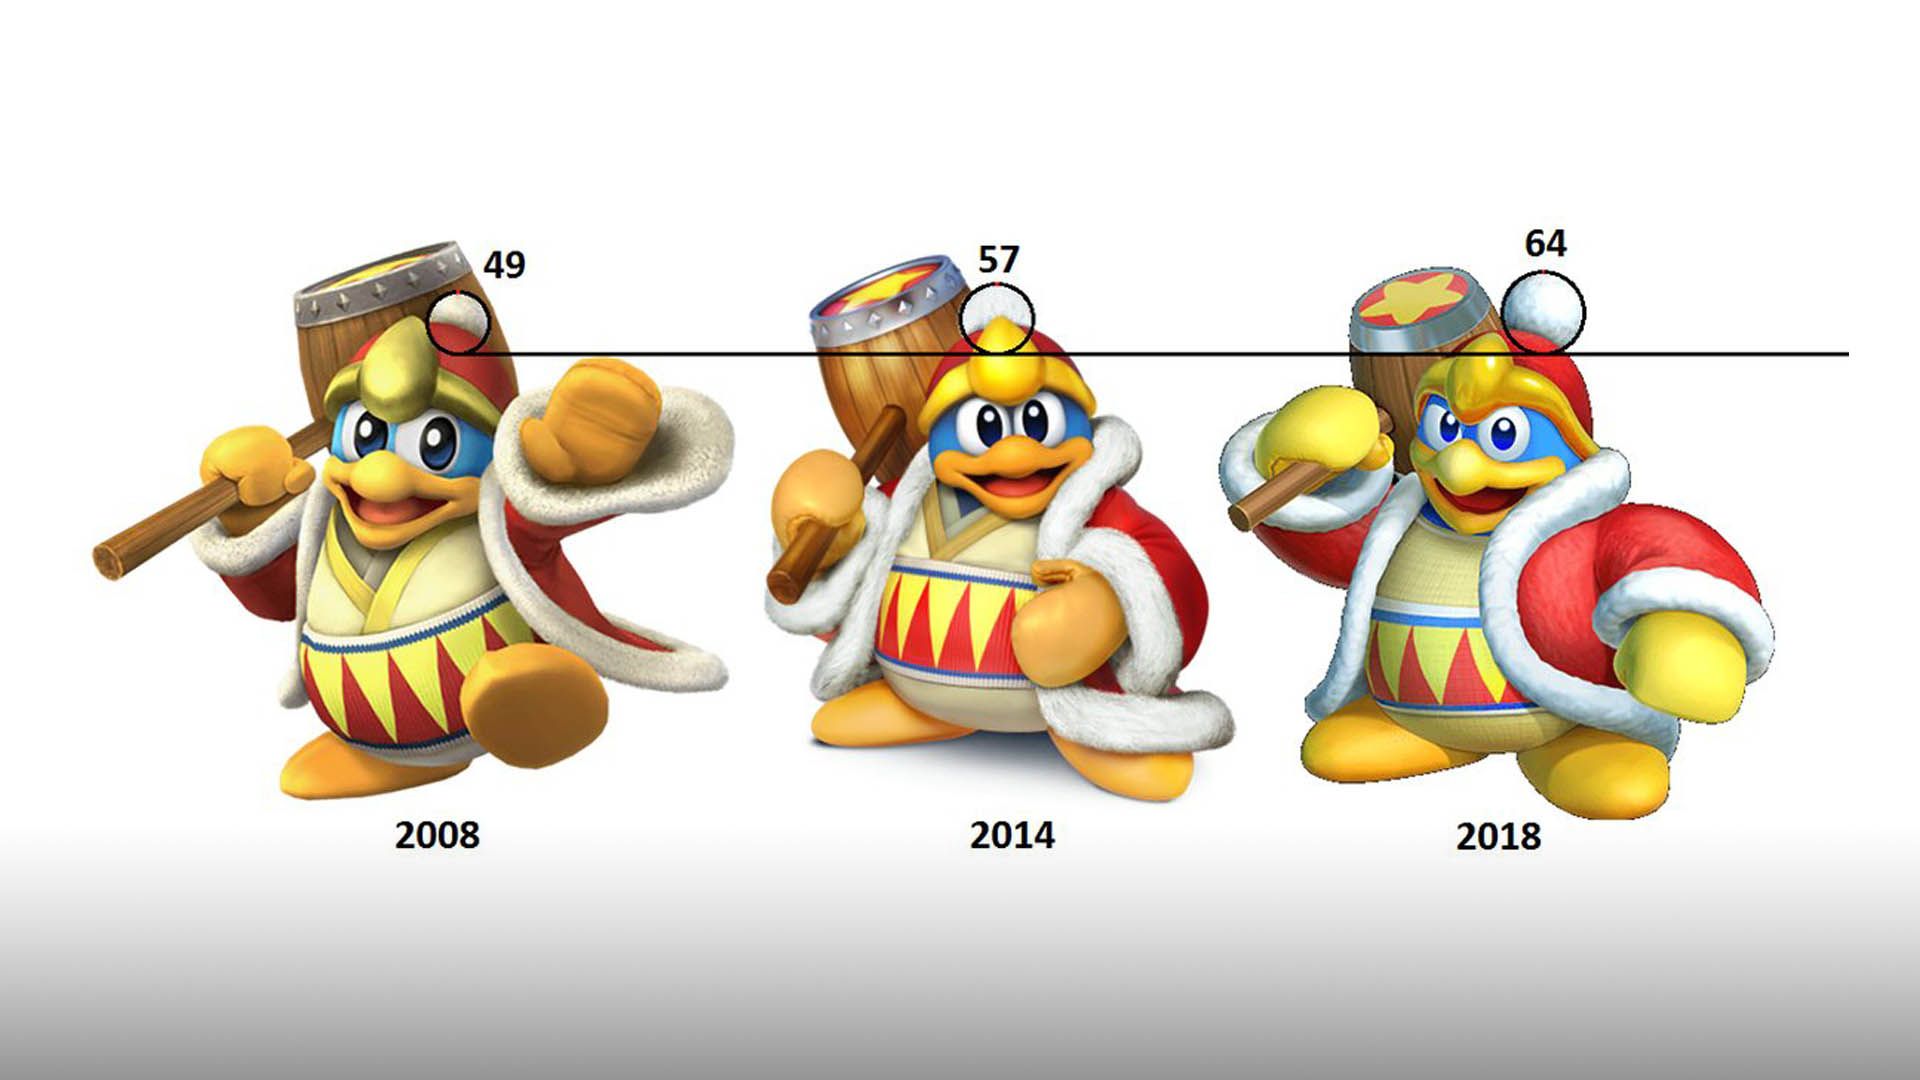 Dedede's pom pom growing at a substantial rate, scientists report